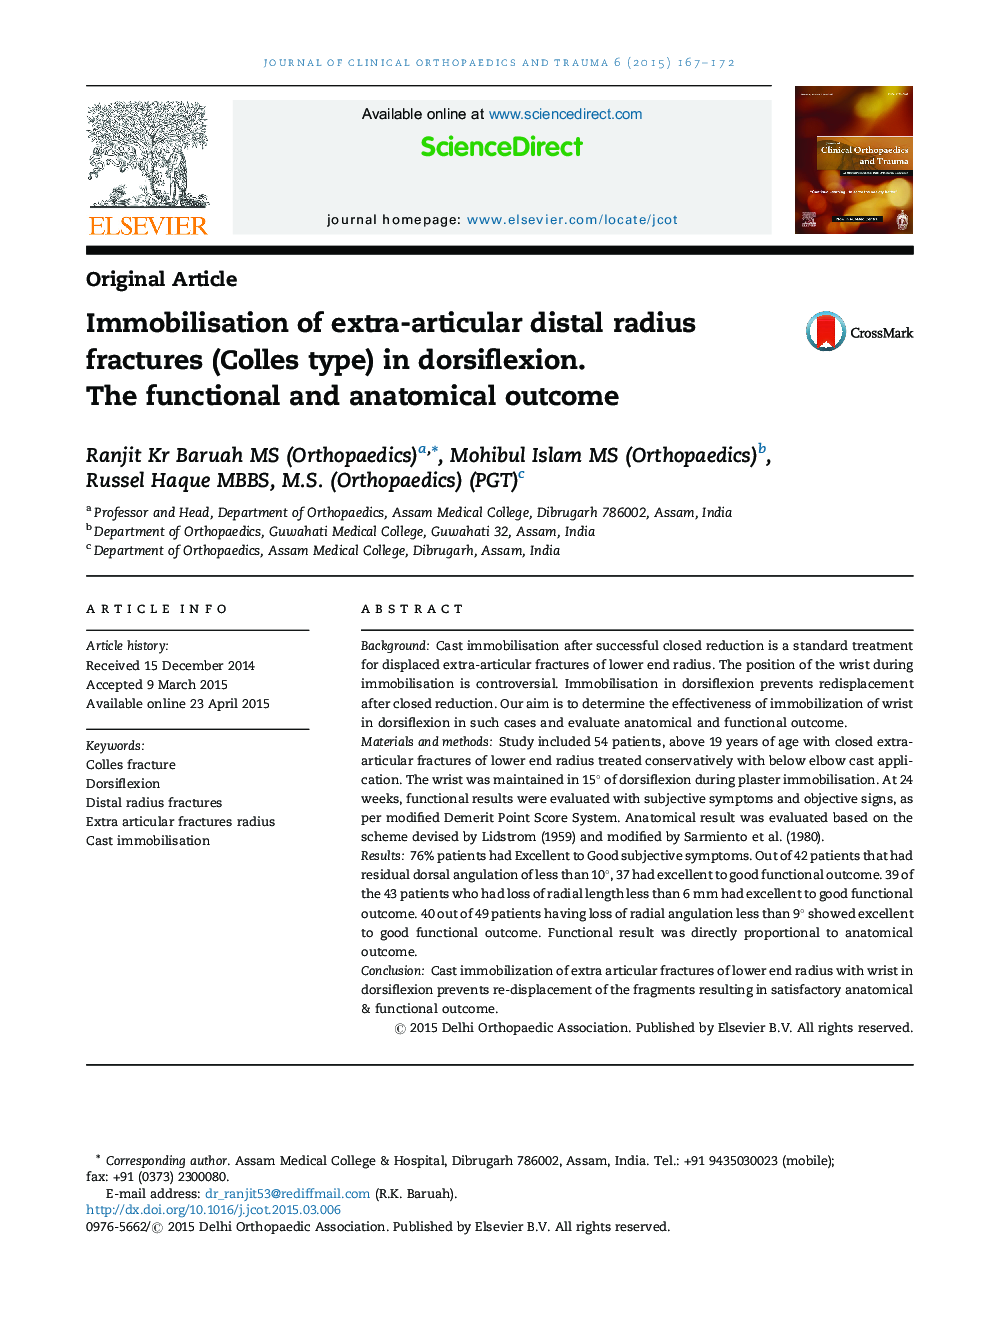 Immobilisation of extra-articular distal radius fractures (Colles type) in dorsiflexion. The functional and anatomical outcome